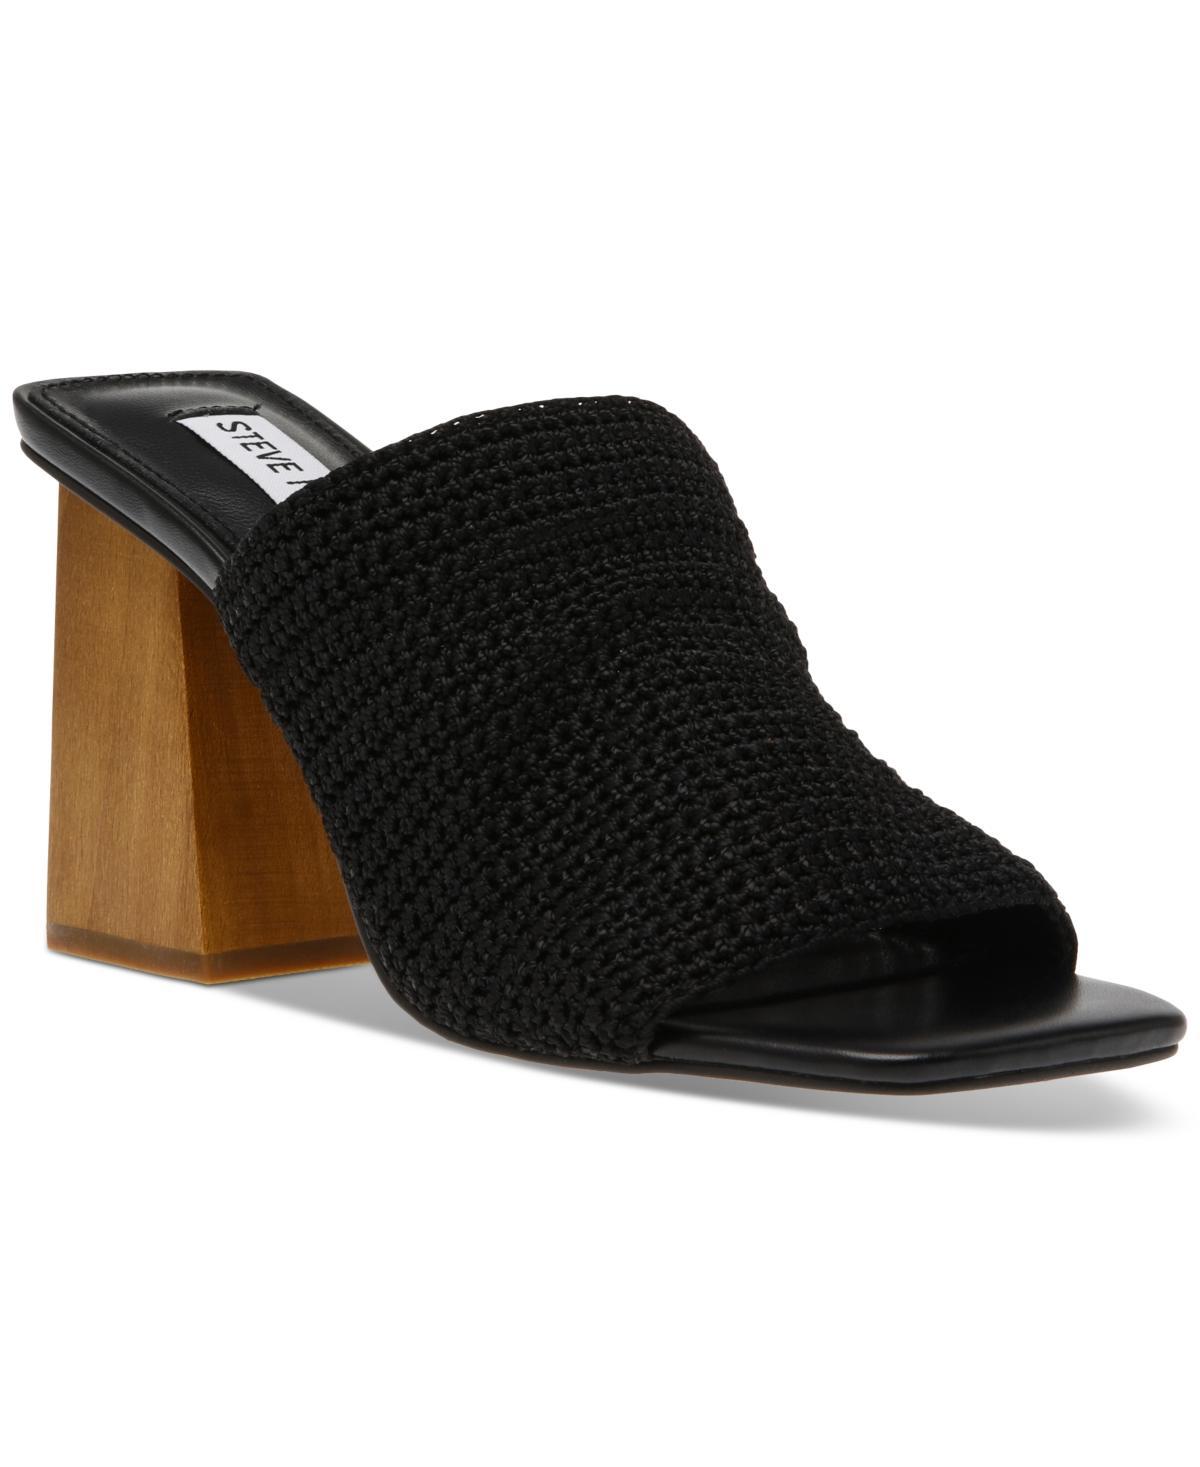 Steve Madden Realize Women's Sandals Product Image